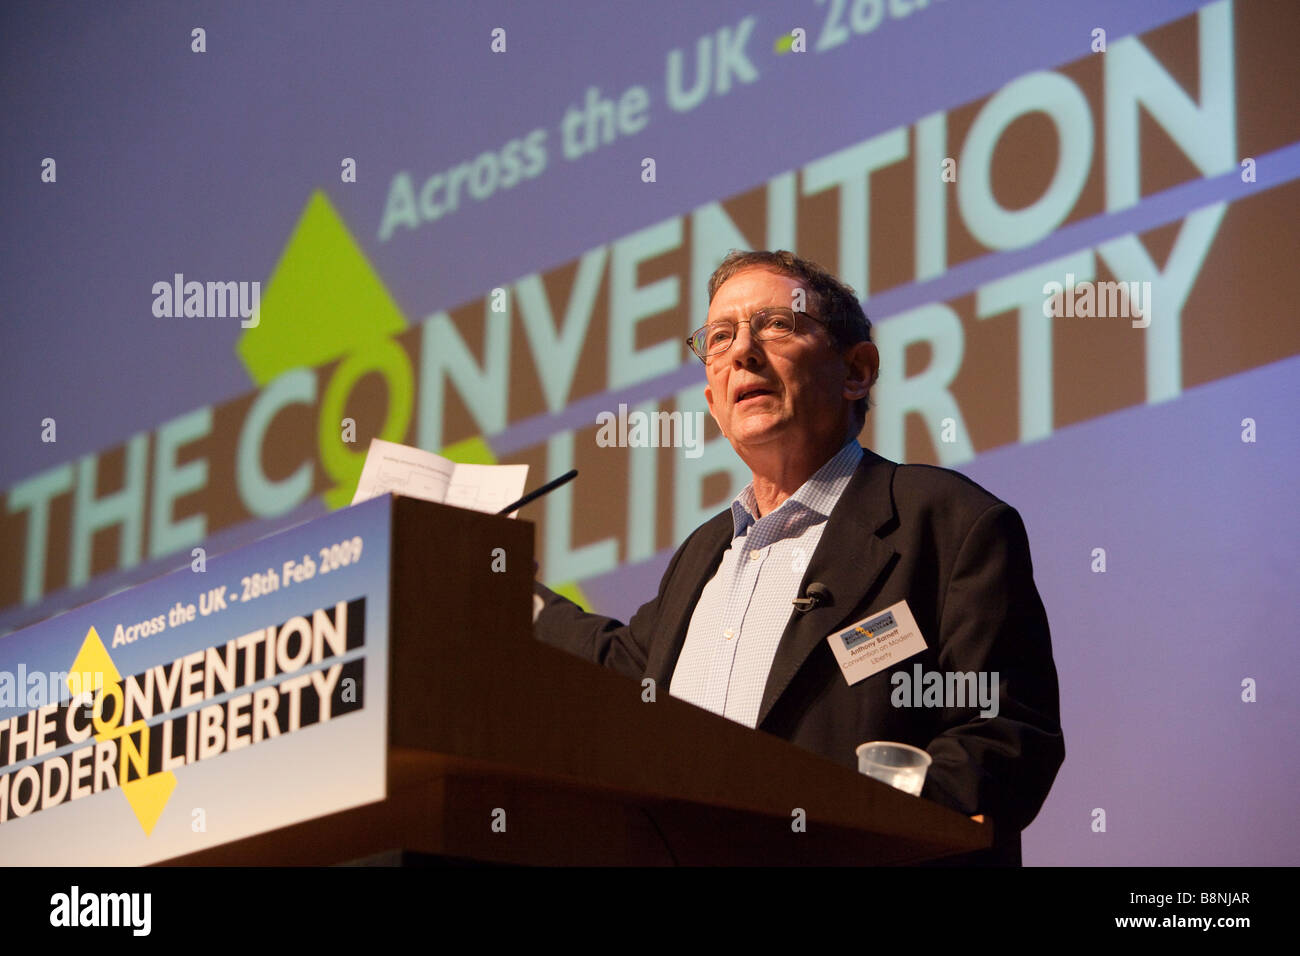 The Convention on Modern Liberty London England 28th February 2009 Anthony Barnett opening the conference Stock Photo